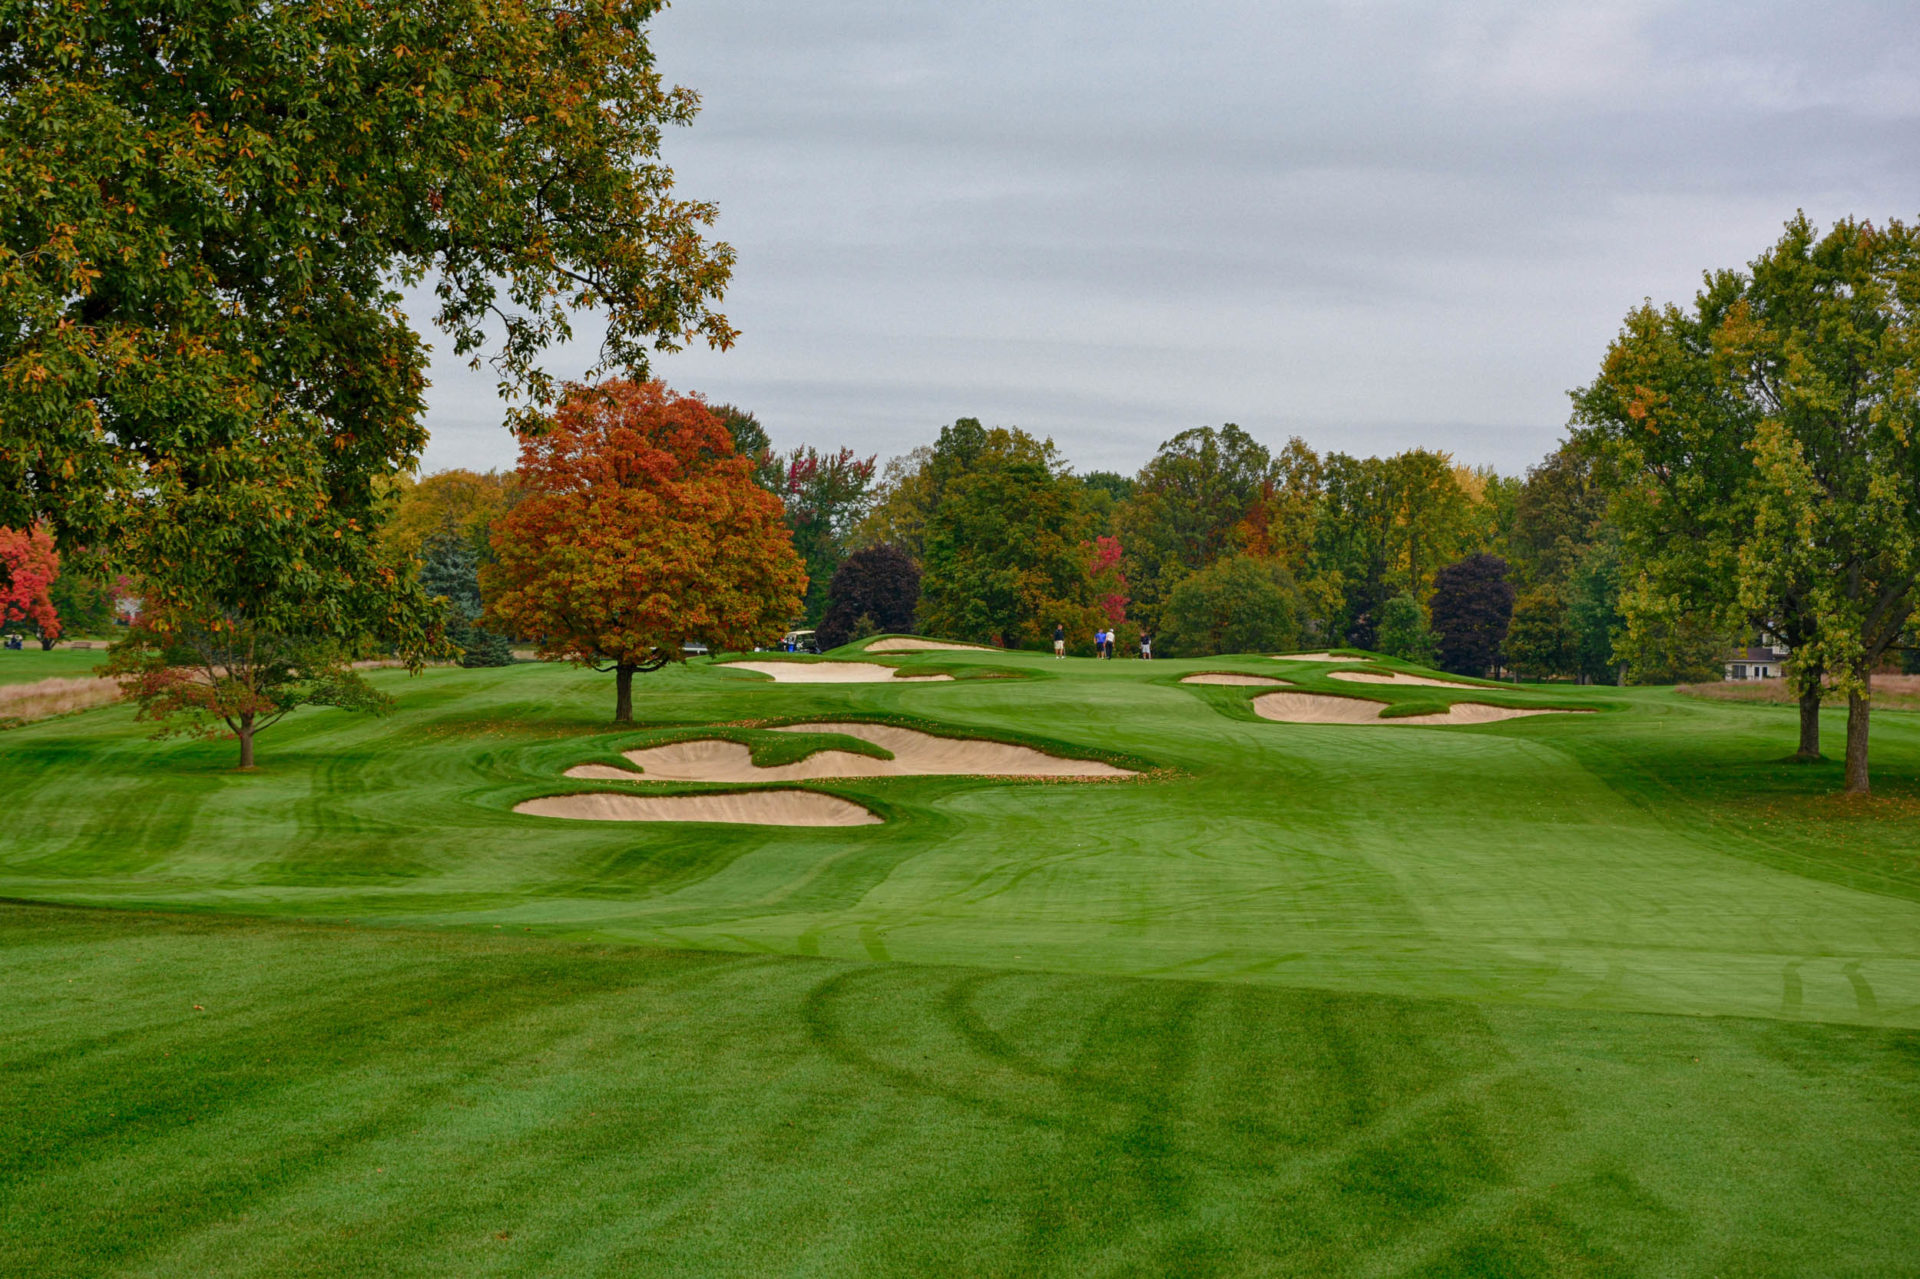 Oakland Hills Country Club is one of the Top 100 Golf Courses in the US